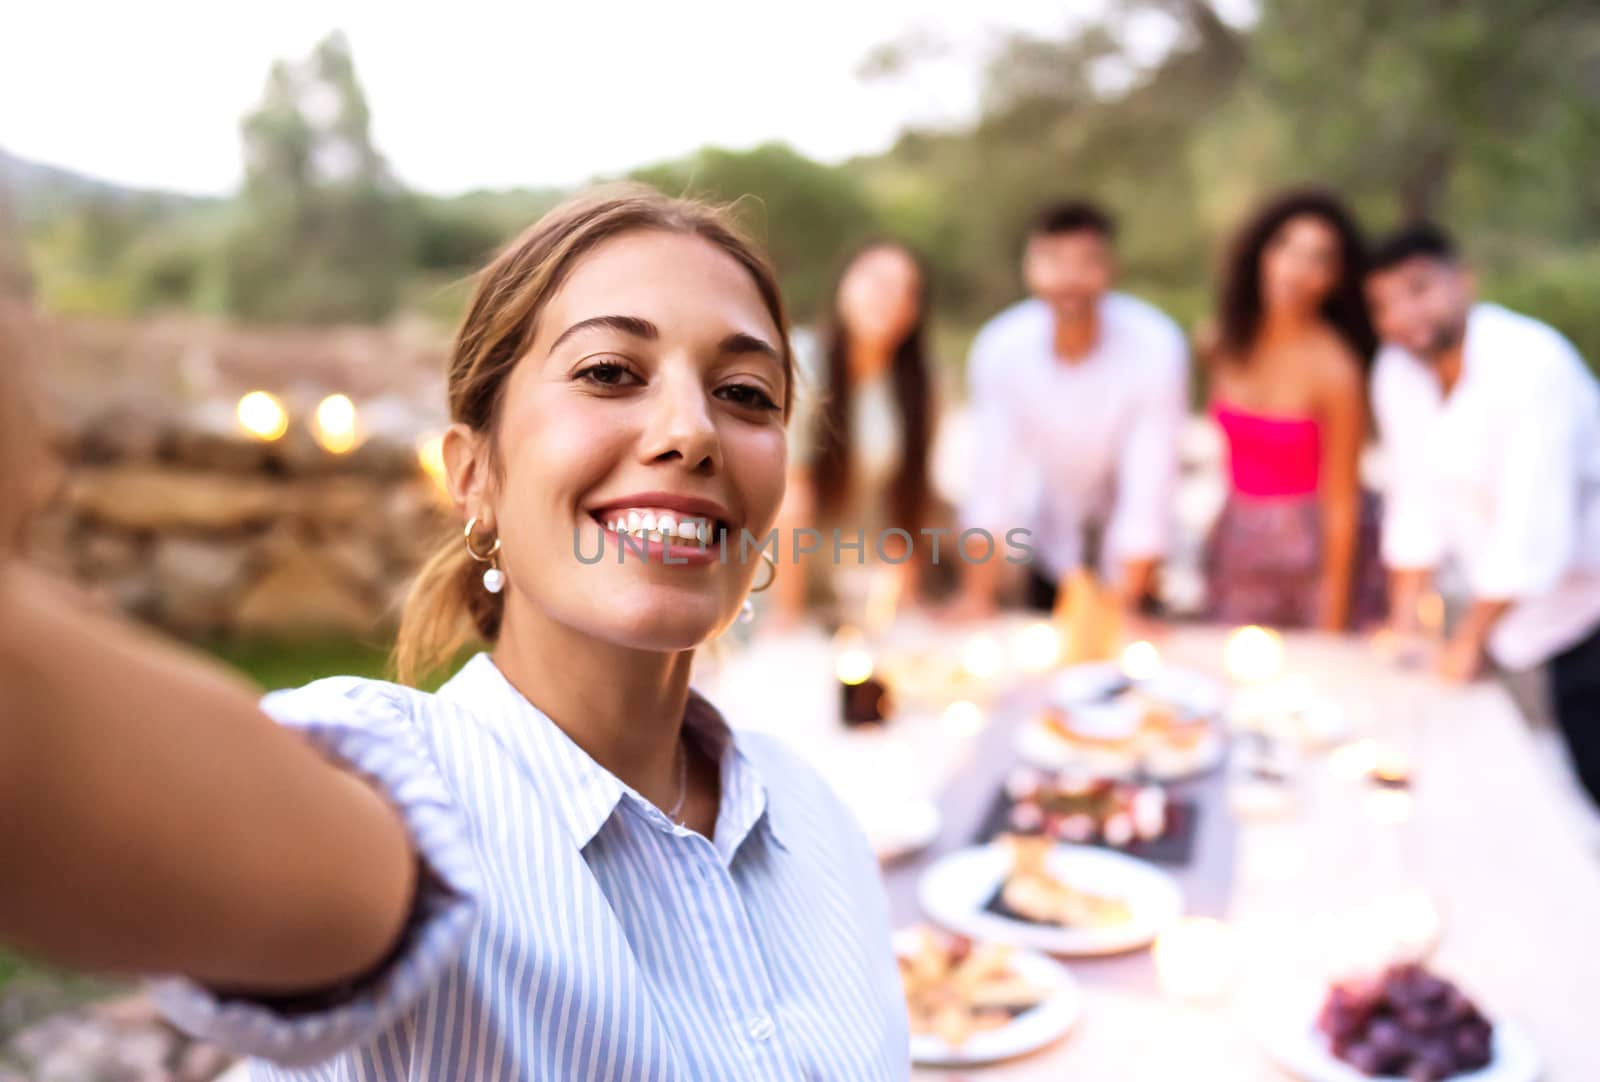 Cute smiling young woman make a self-portrait of herself and friends in the background celebrating in the garden at sunset - Happy friends moment of a home outdoor party - Female face-selective focus